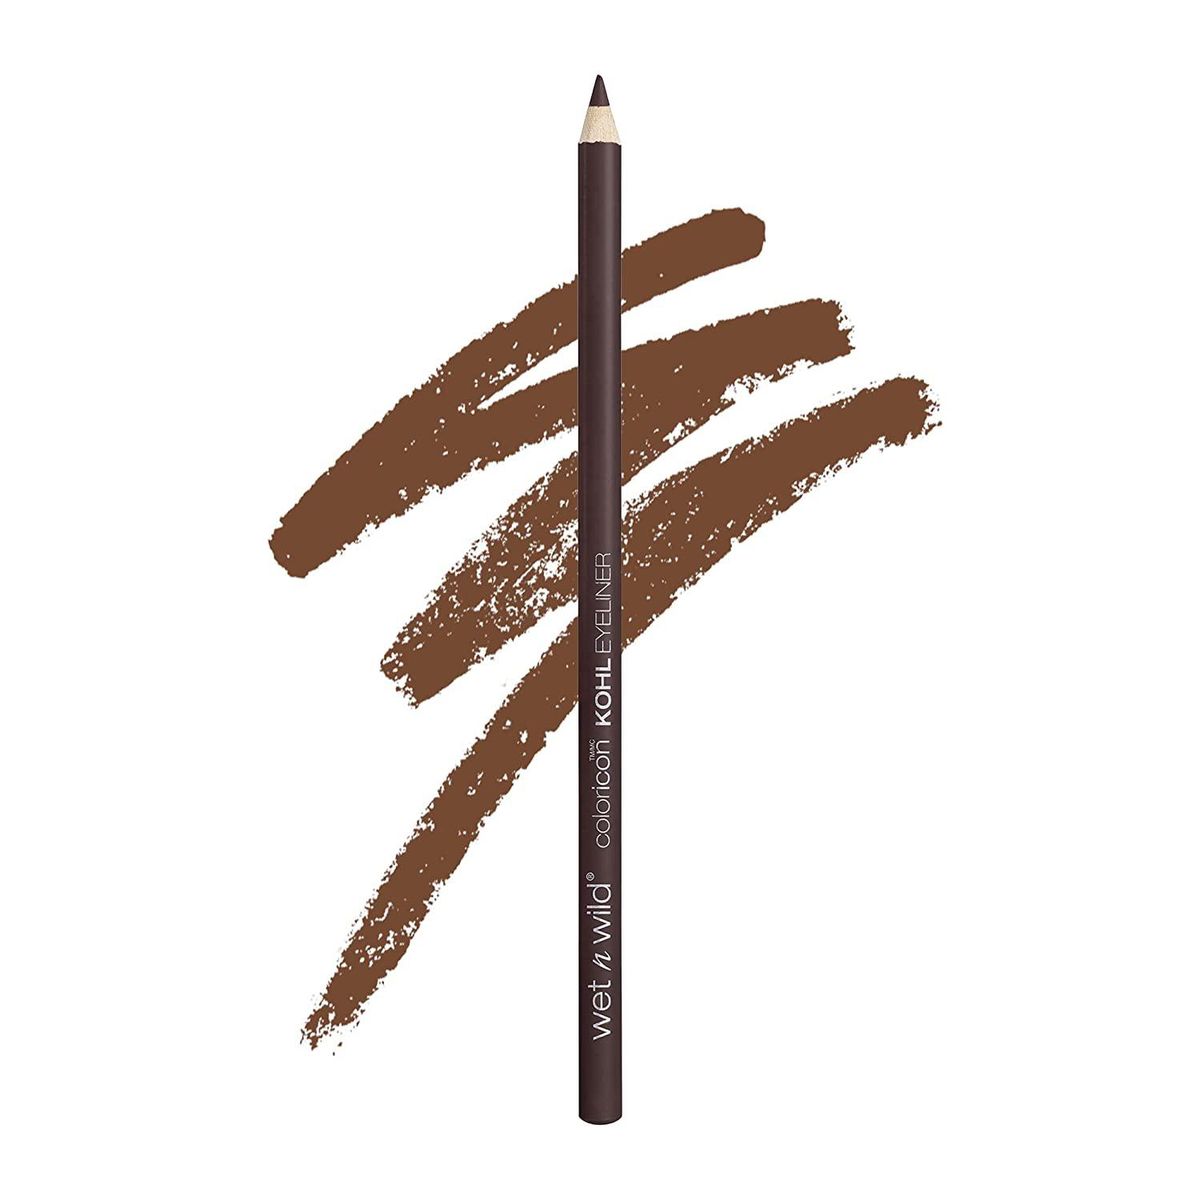 Kohl Liner in Simma Brown Now!